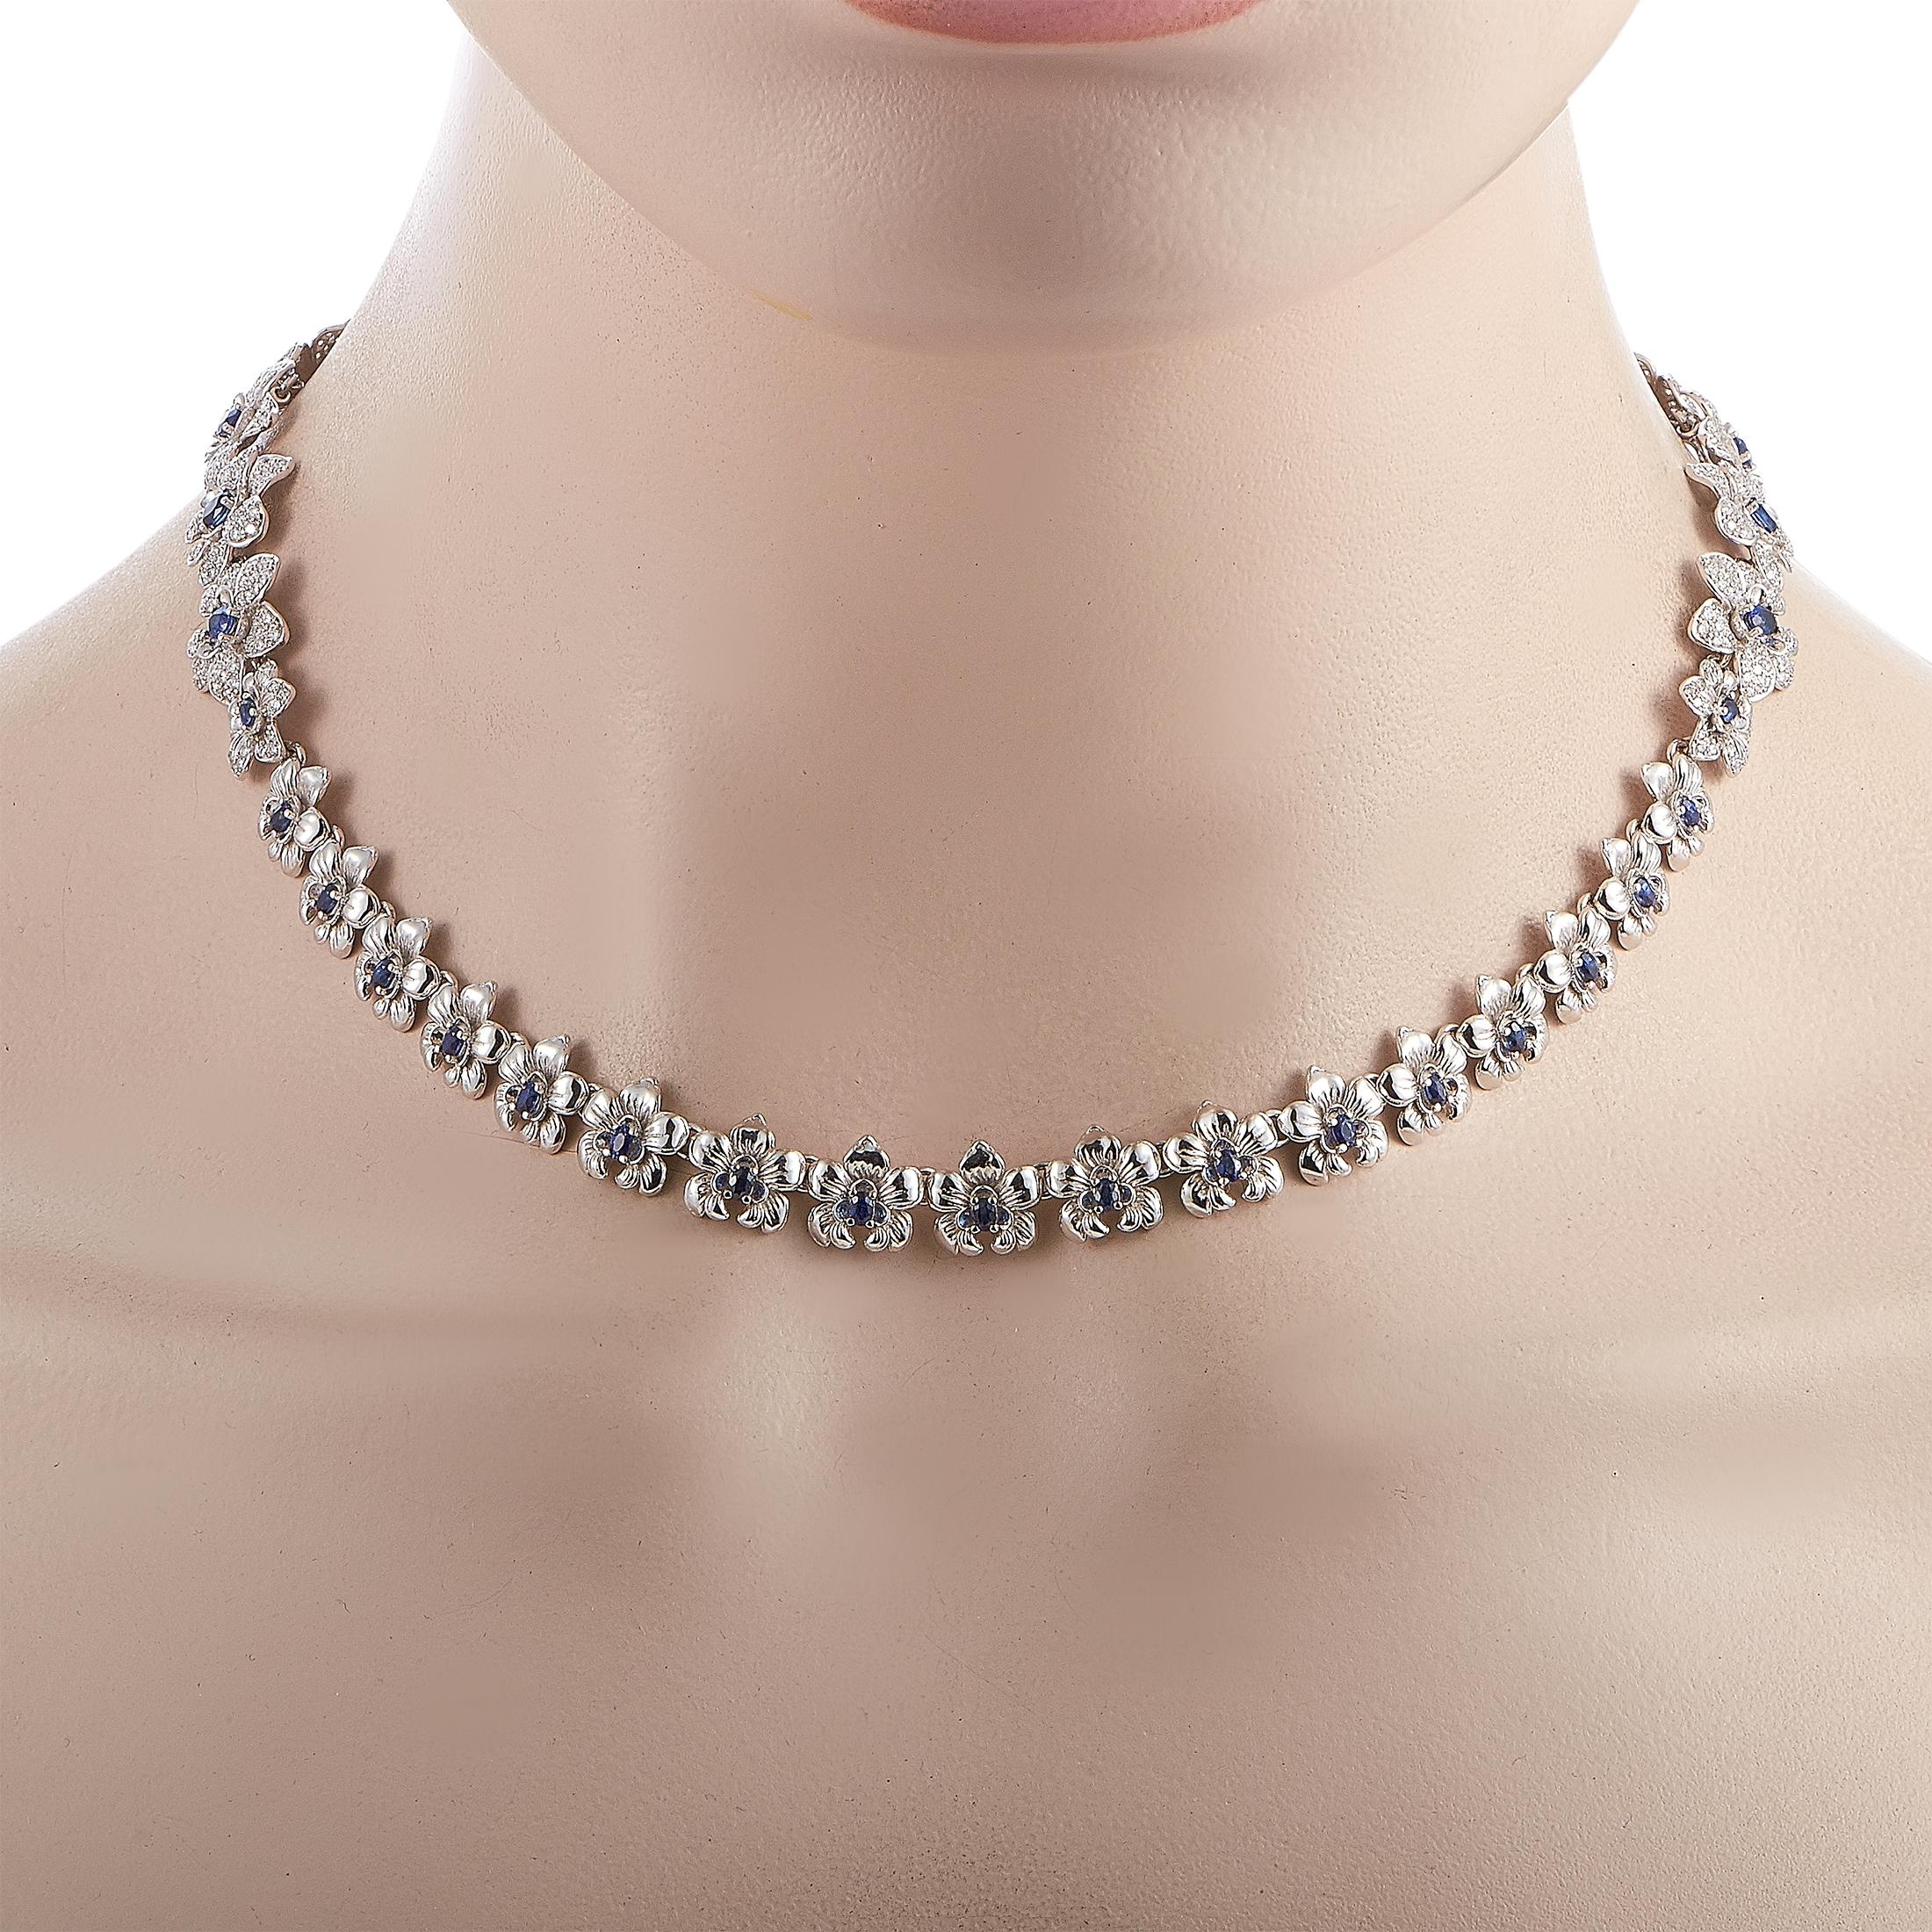 The Carrera y Carrera “Orquídeas” necklace is made of 18K white gold and embellished with diamonds and sapphires that total 6.95 and 3.42 carats respectively. The necklace weighs 53.2 grams and measures 17” in length.

Offered in brand new